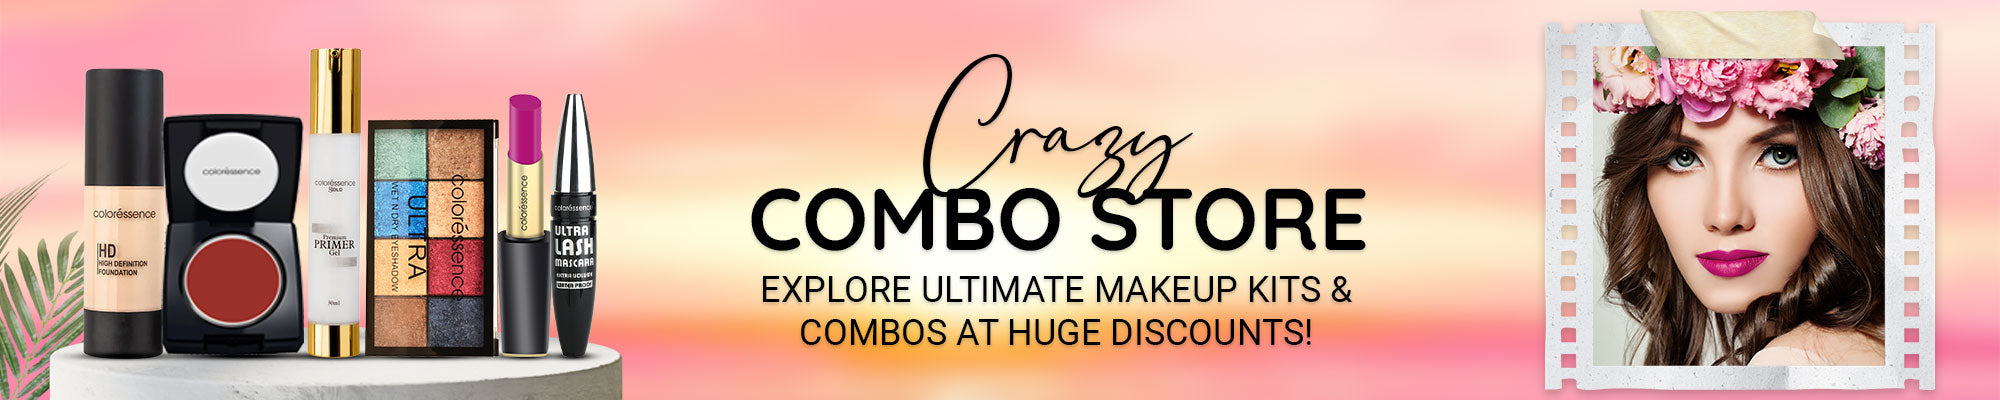 The Crazy Combo Store